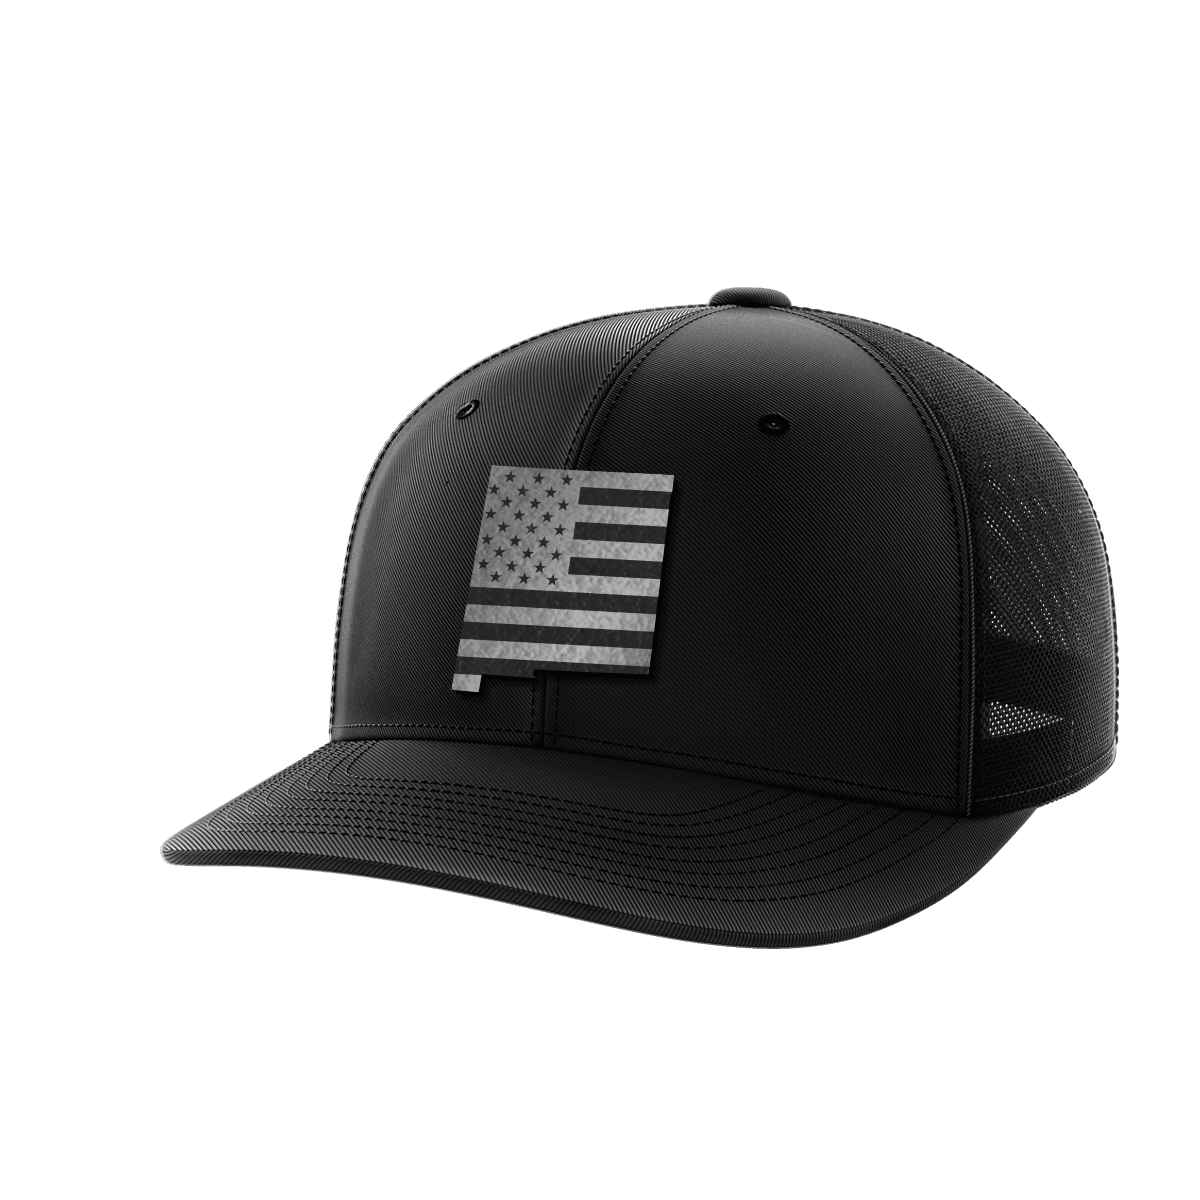 New Mexico United Collection (black leather) - Greater Half